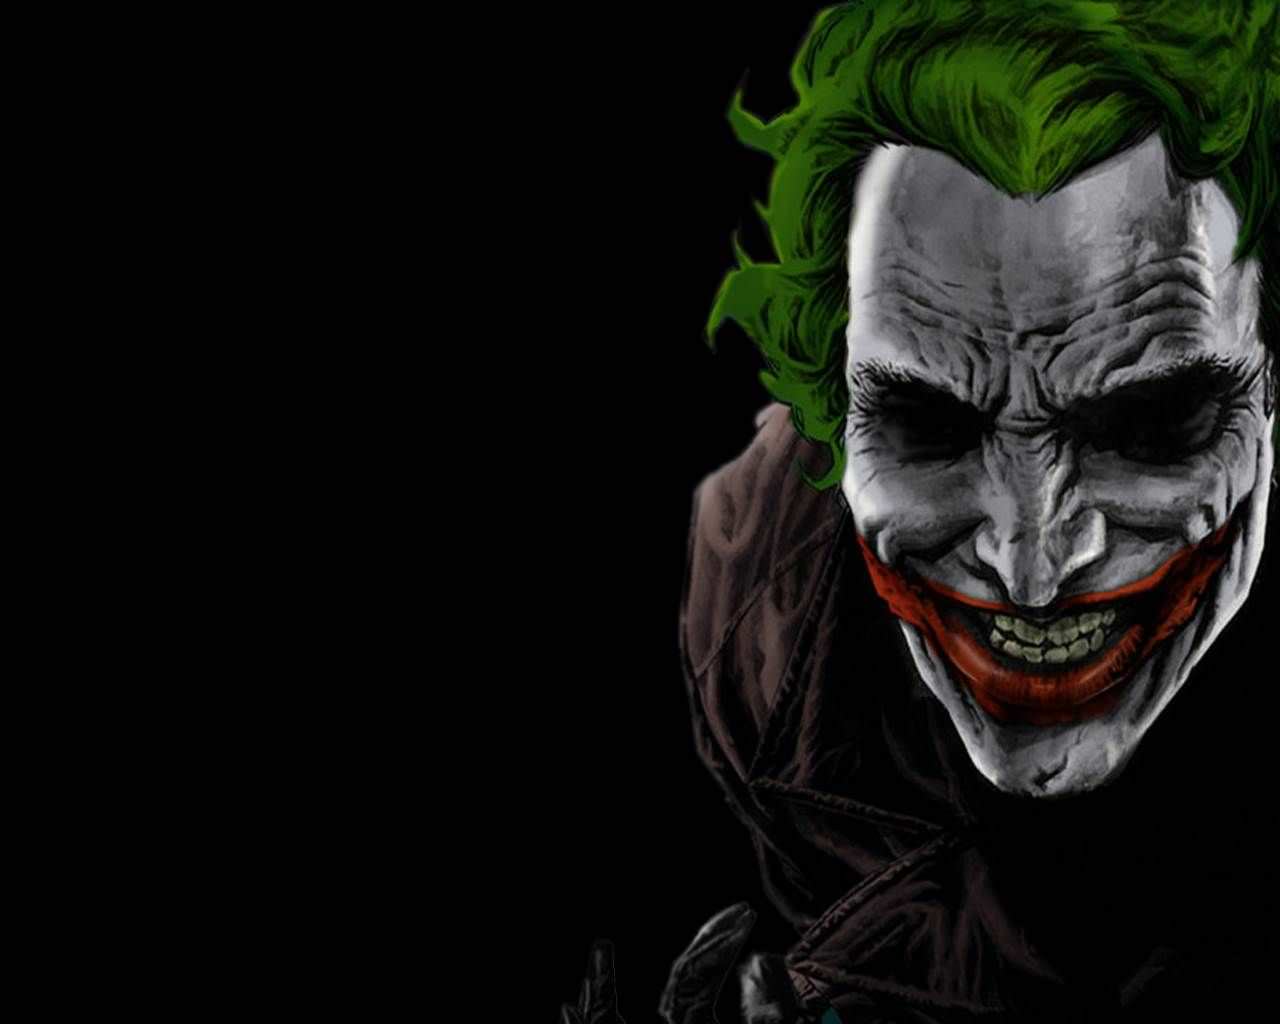 Awesome 50 Joker Wallpaper & Picture HD For iPhone & Anddroid